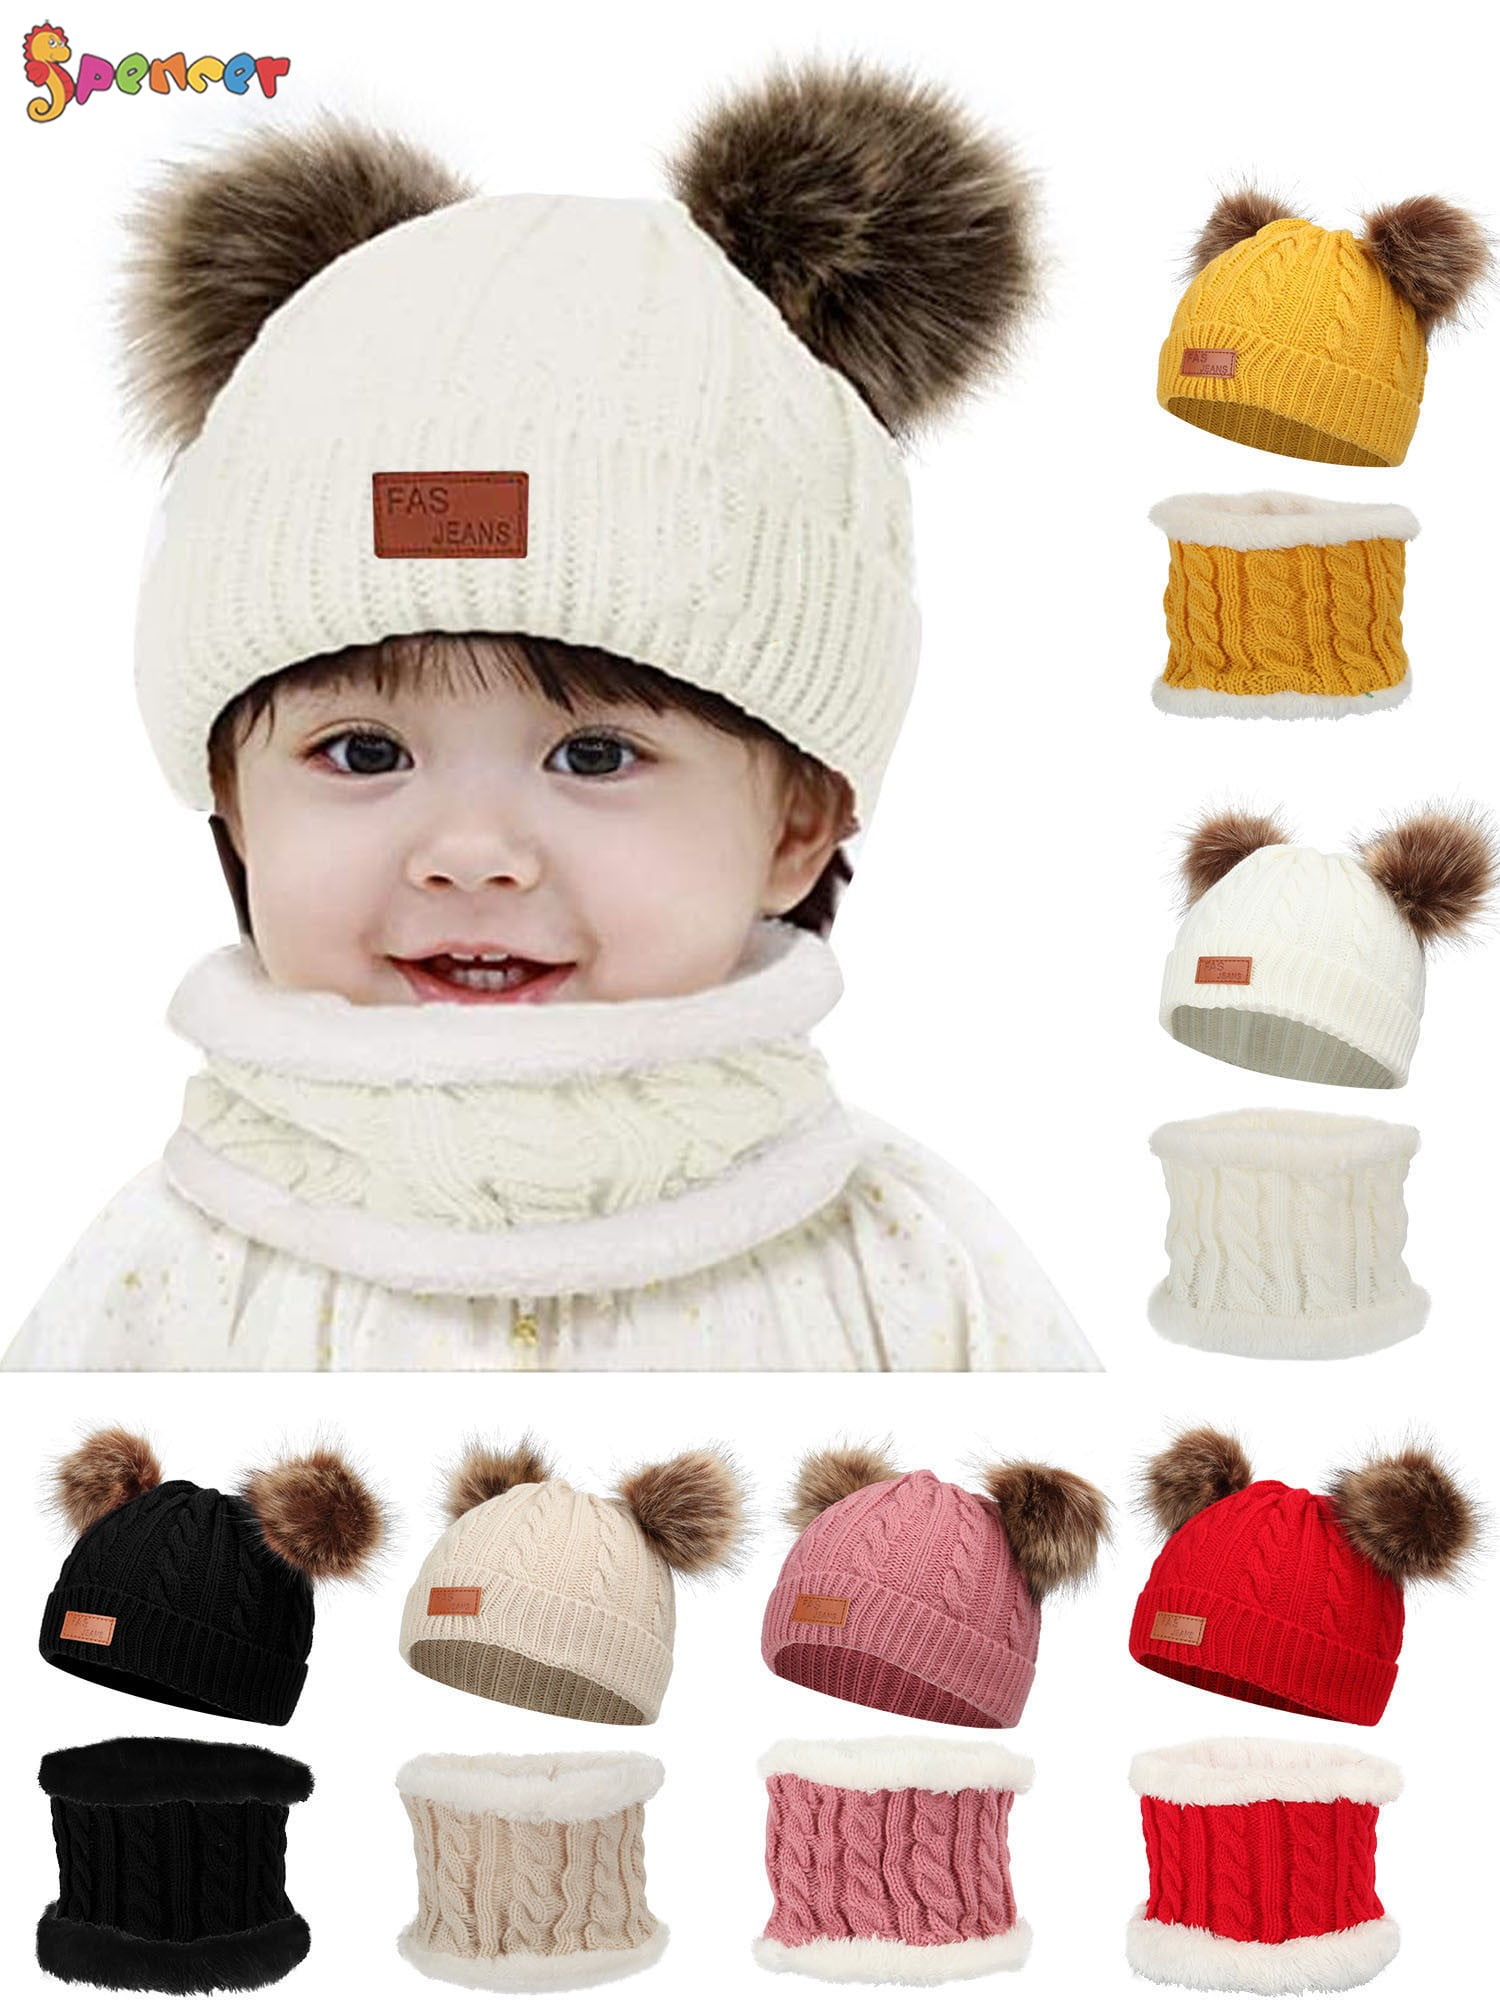 Knitted Baby Hat Scarf Set Winter Warm Boys Girls Beanie Fleece Lining Toddler Kids Hat with Pompom